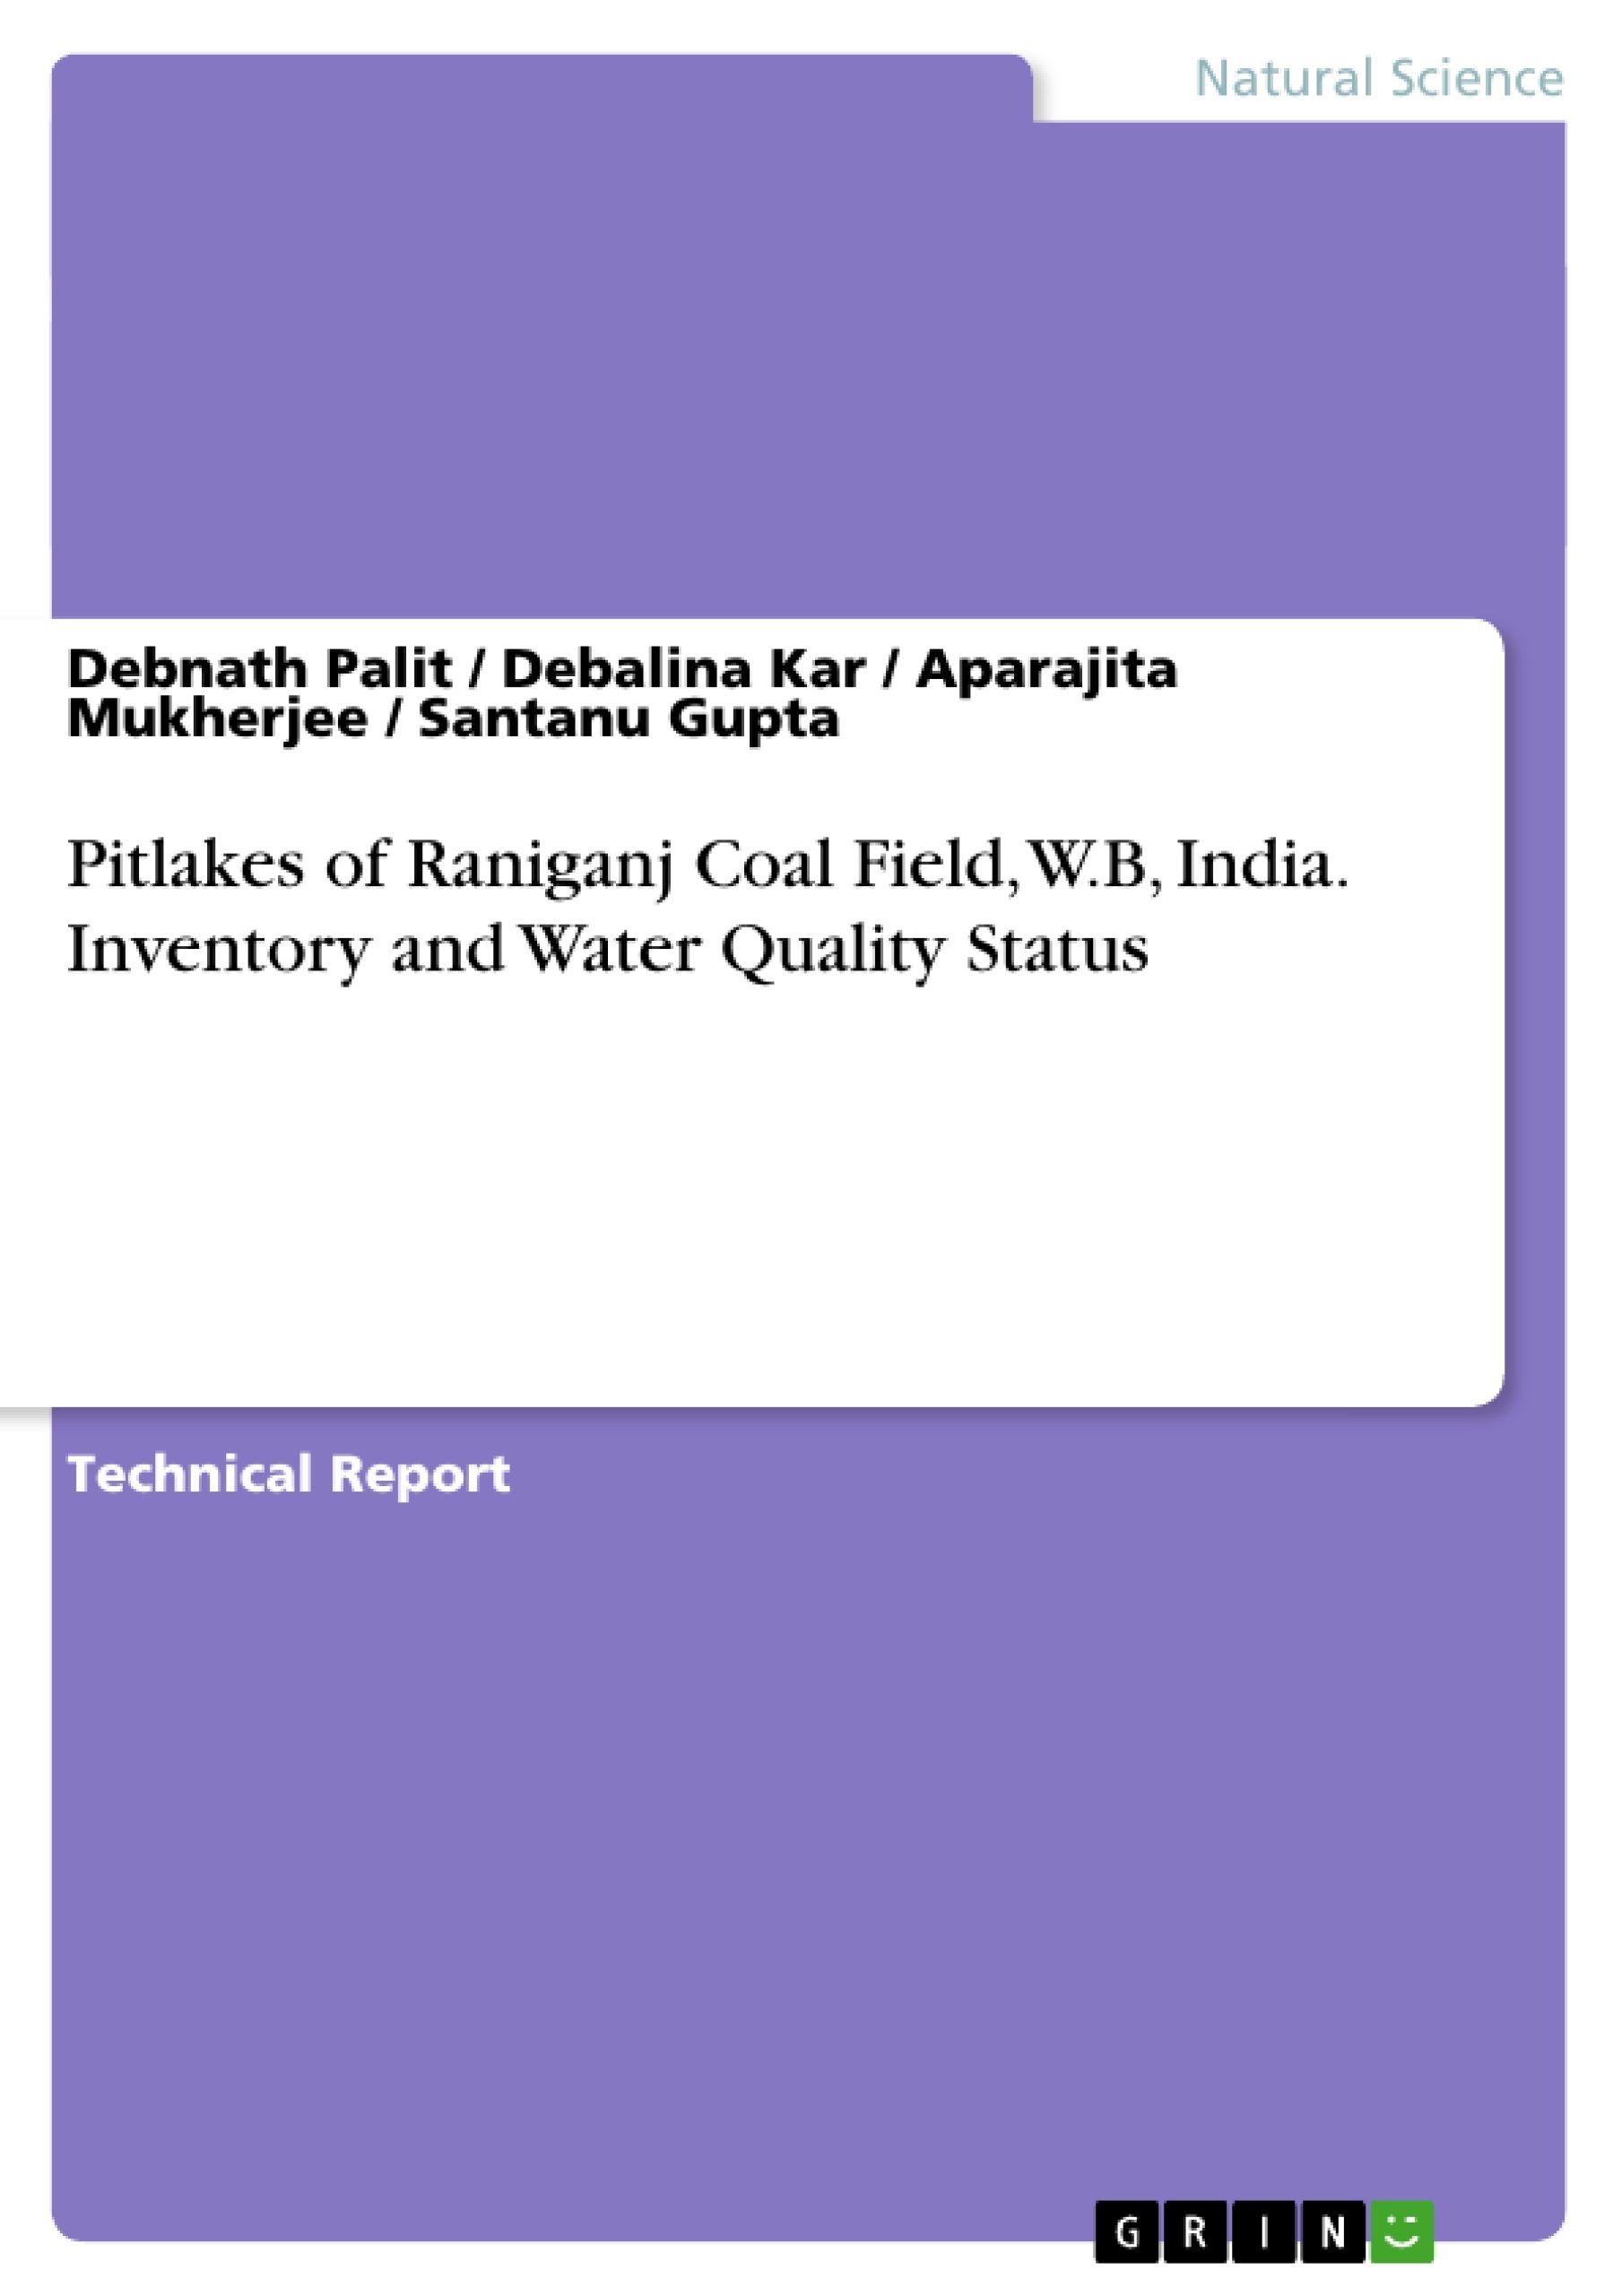 Titre: Pitlakes of Raniganj Coal Field, W.B, India. Inventory and Water Quality Status